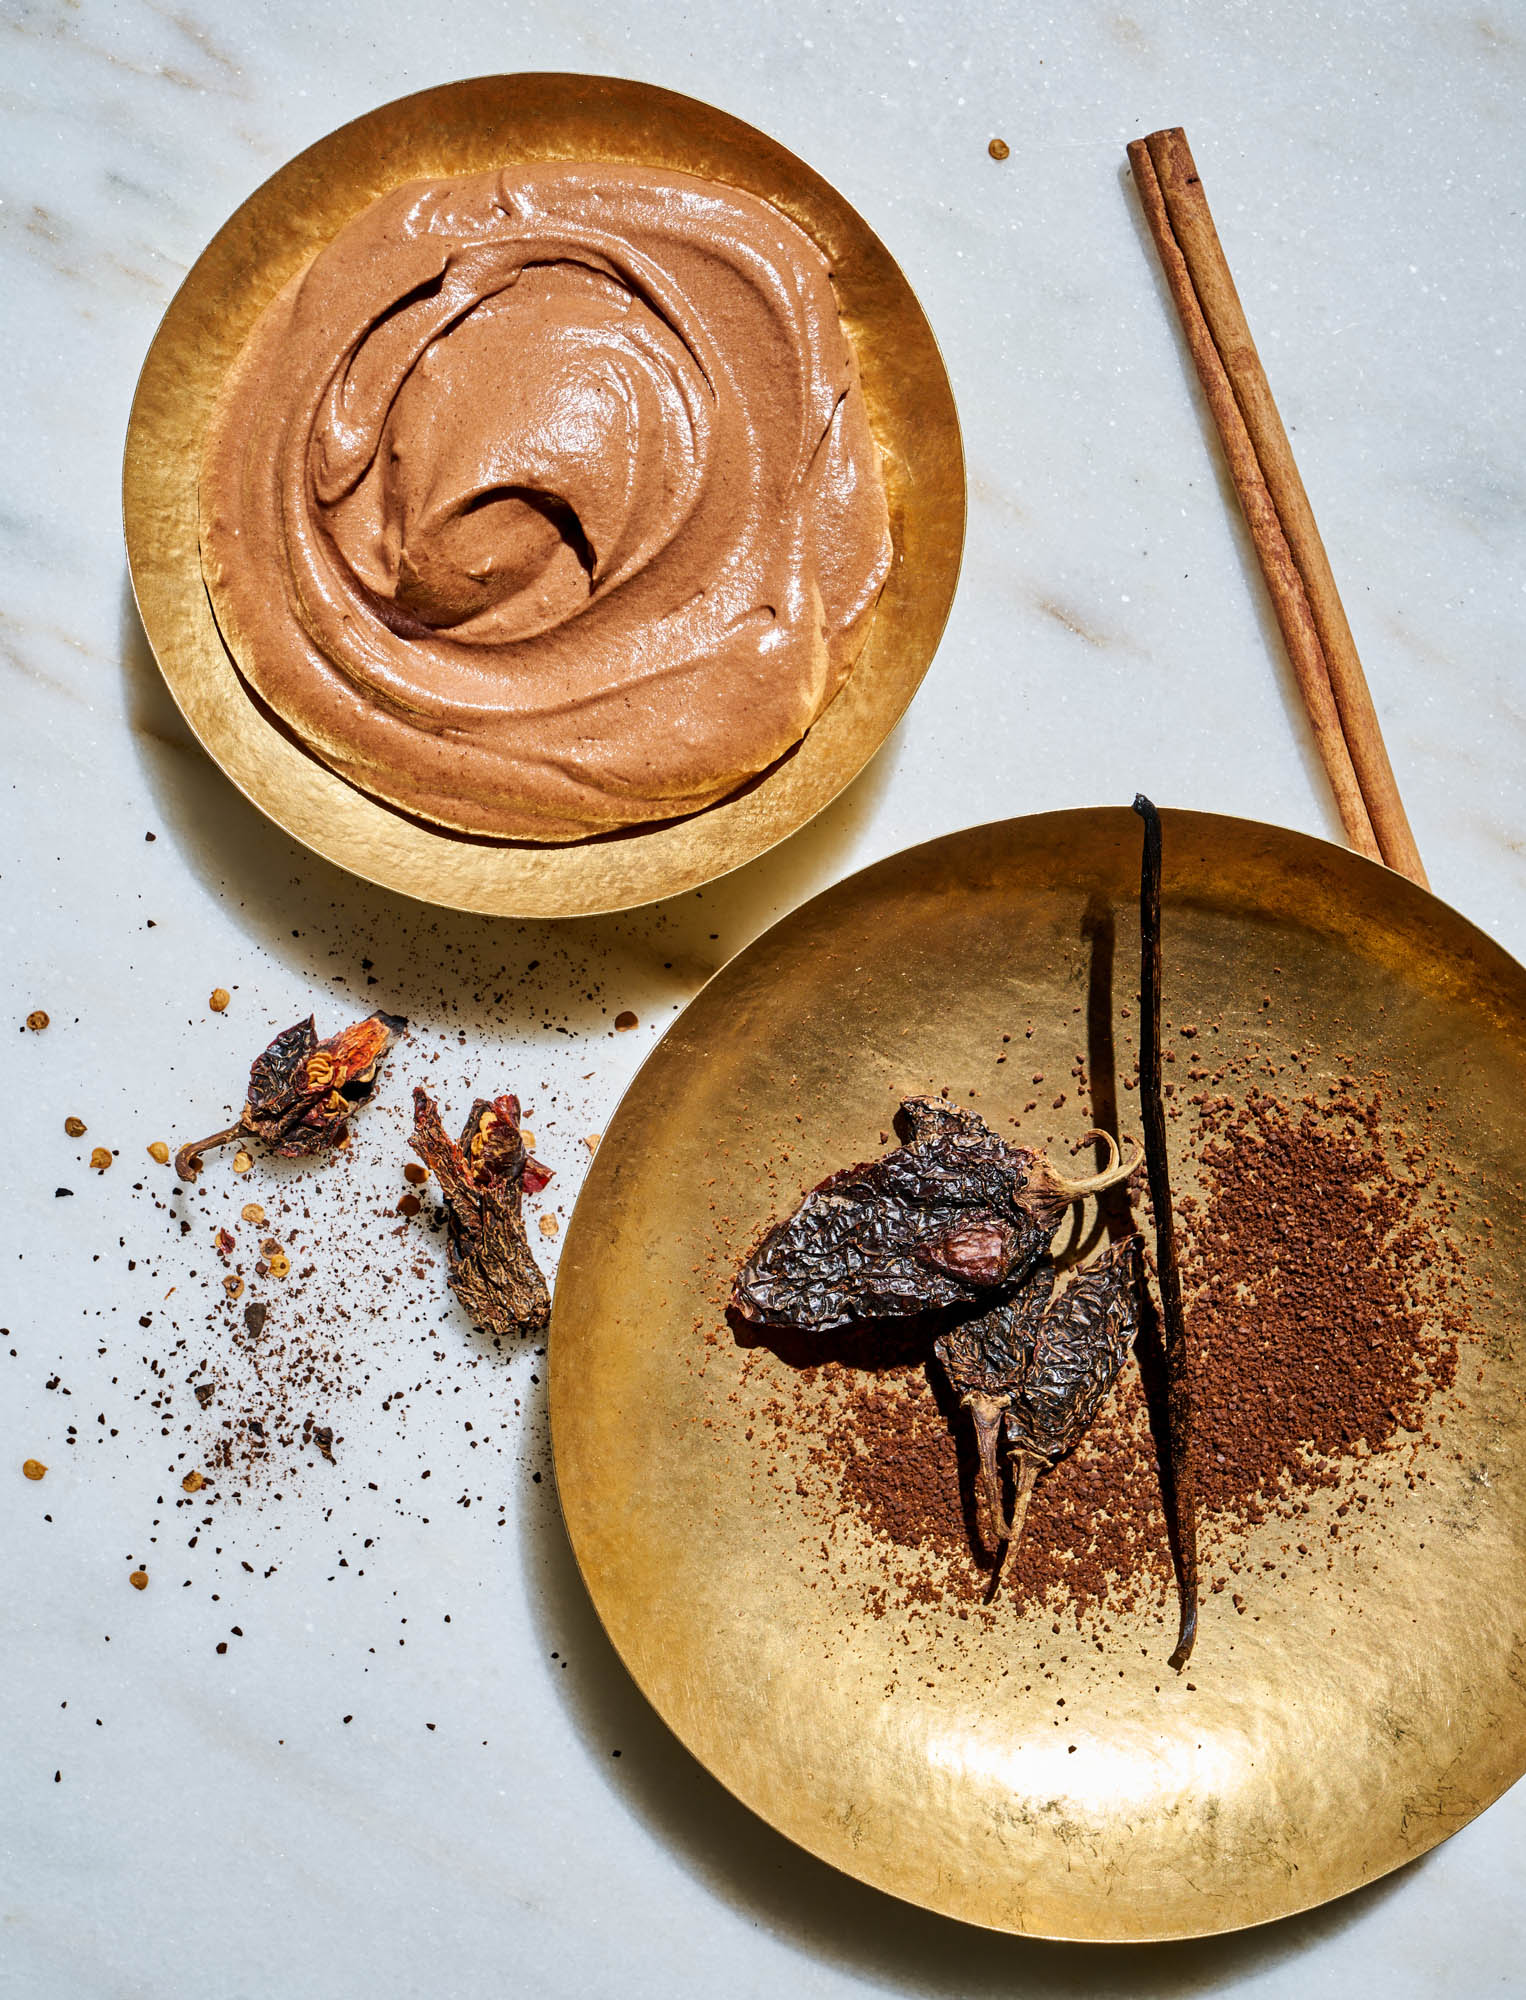 190504_HARTWOOD_OUTDOOR_KITCHEN_SHOOT_04_SMOKED_CHOCOLATE_MOUSE_006